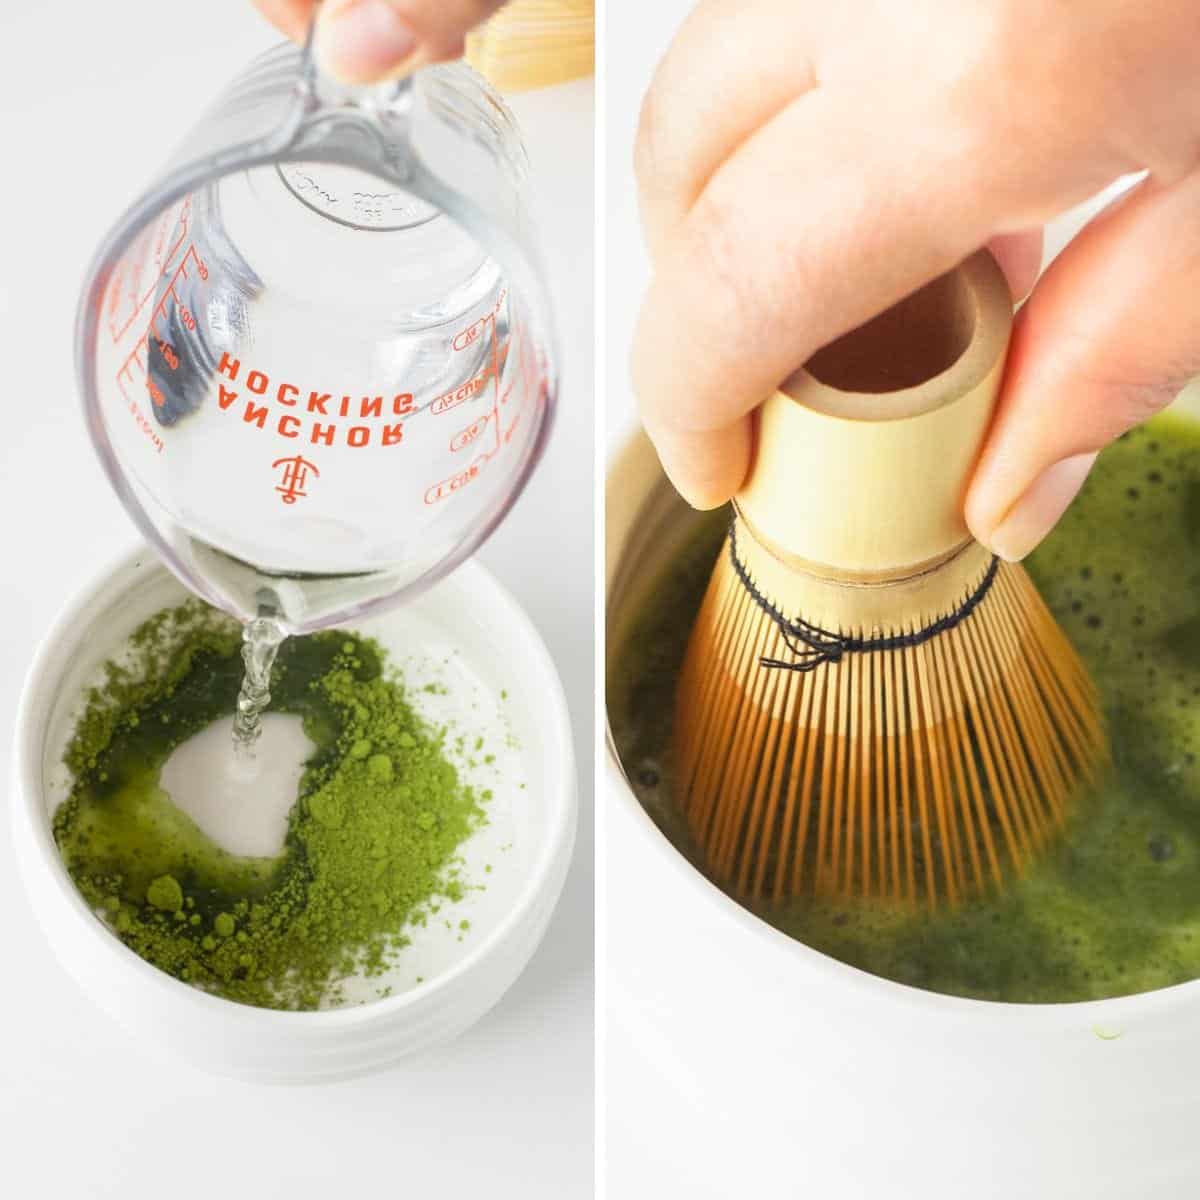 Collage of two images showing how to make matcha paste and whisking it with a bamboo chasen